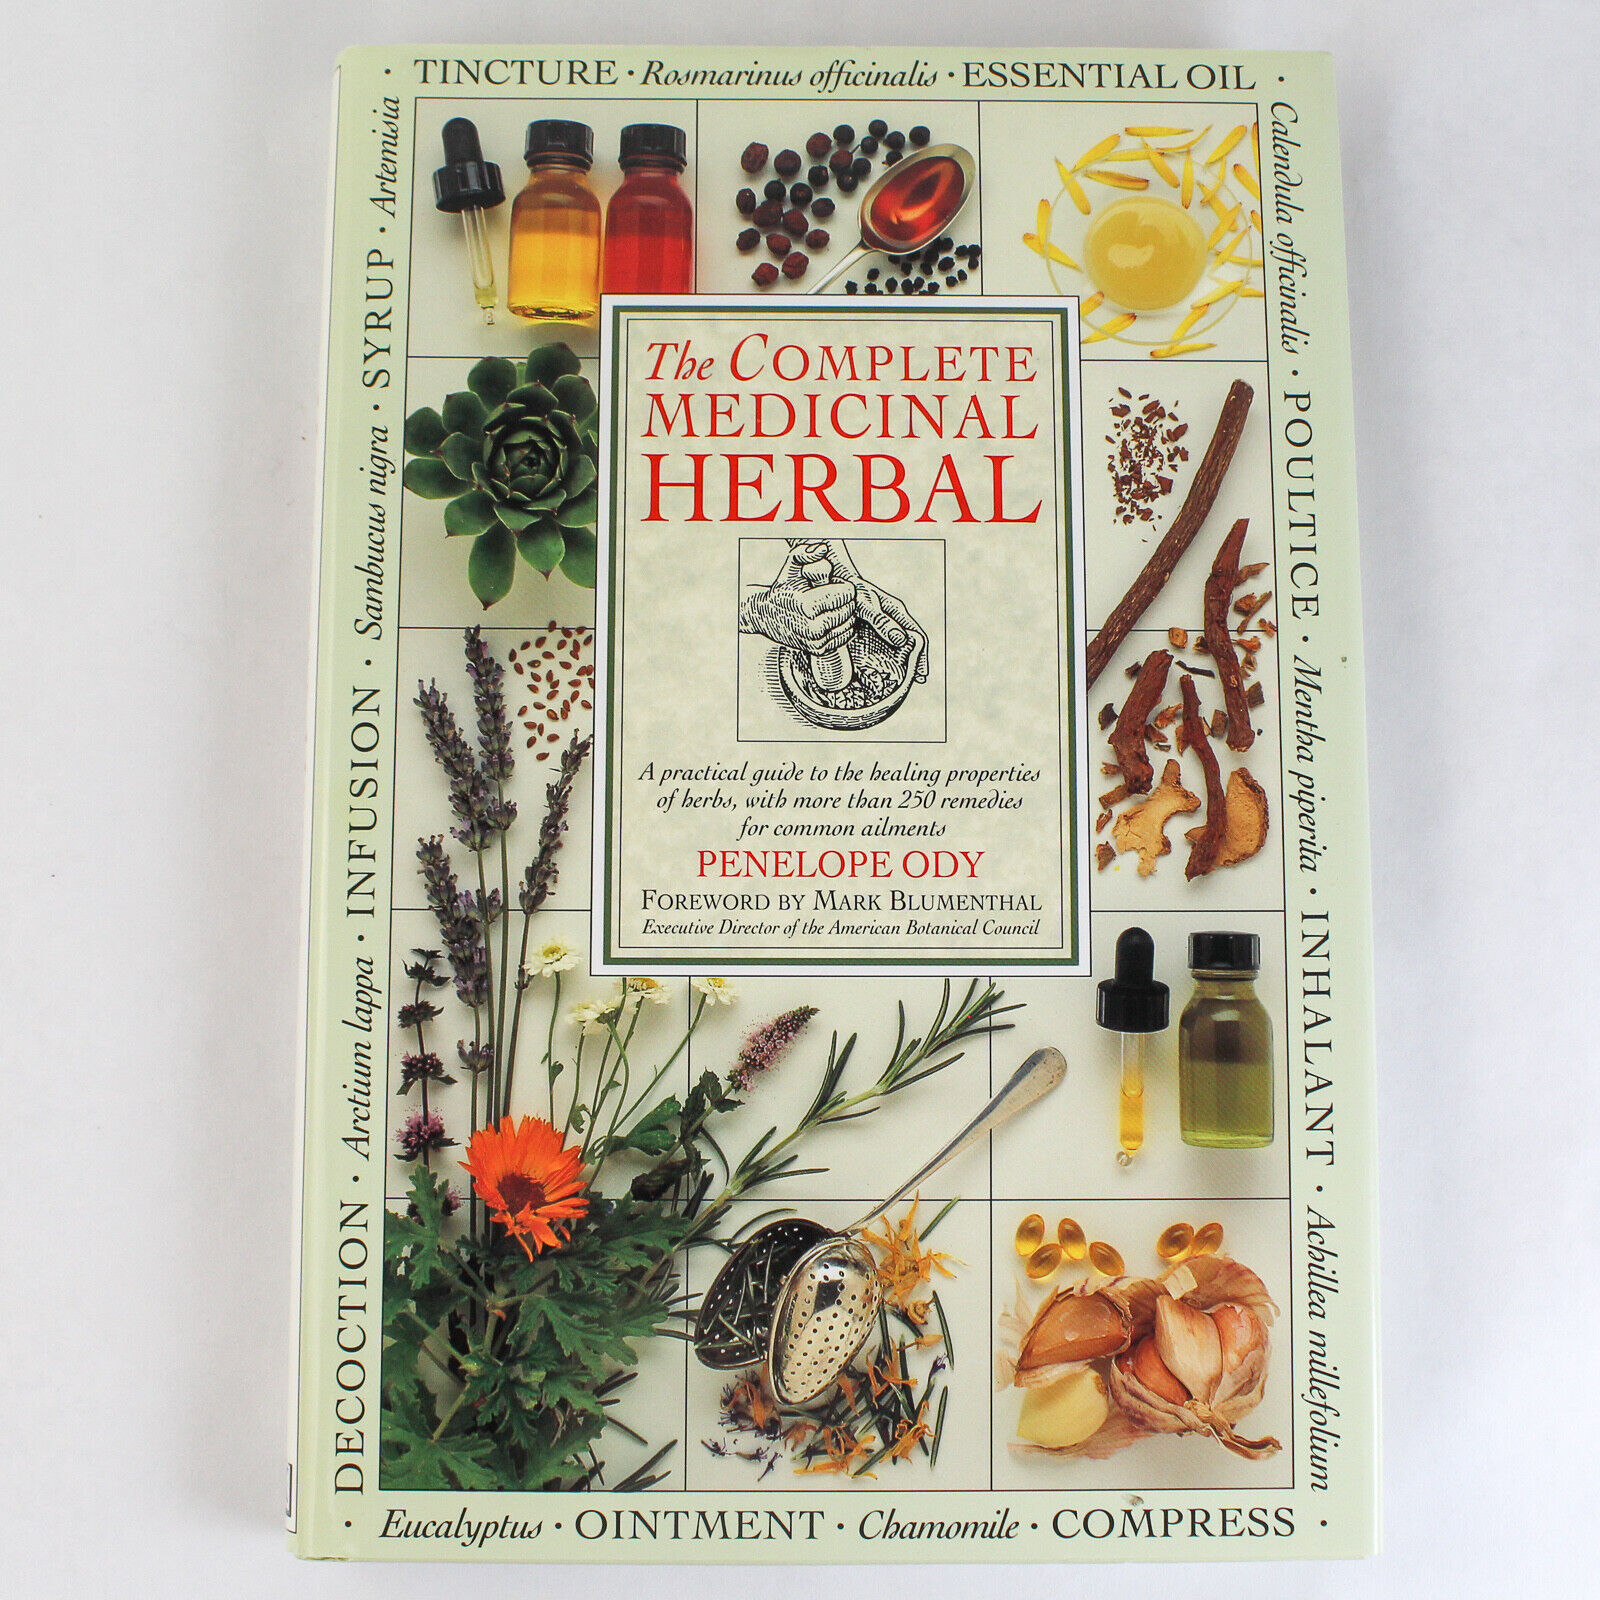 The Complete Medicinal Herbal Penelope Ody 1993 DK Publishing Dust Jacket HC